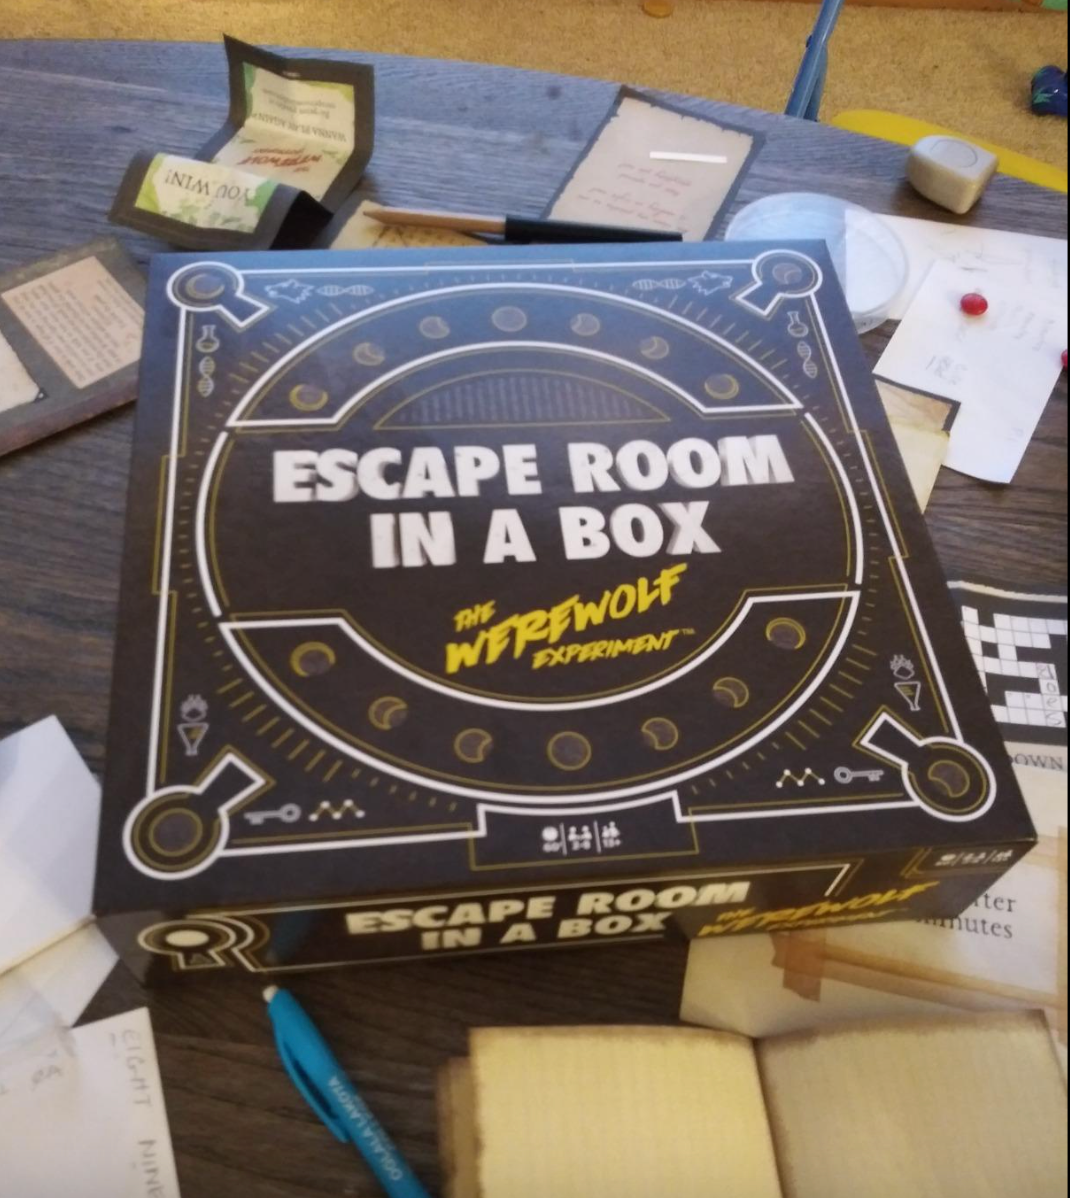 The escape room board game box with some contents of it laid out 